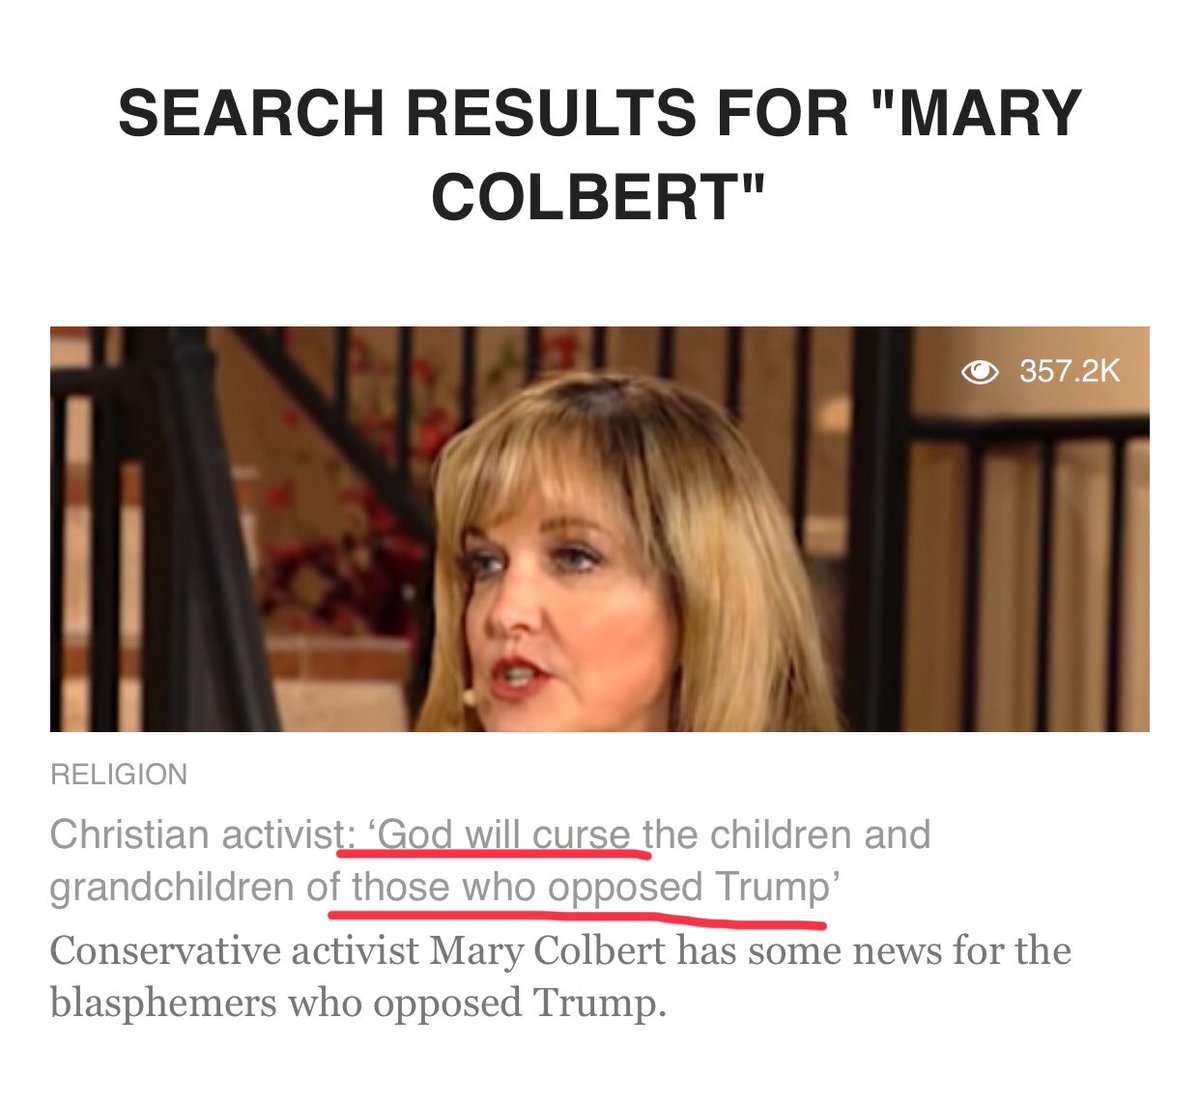 This is Mary Colbert, Prophet Mark Taylor’s coauthor of “The Trump Prophecy” which has been hawked On Trinity Broadcasting Network (TBN) since late 2015. Mark was a patient of her husband’s. Taylor shared a dream he had of trump being anointed by God & the book was written. /3